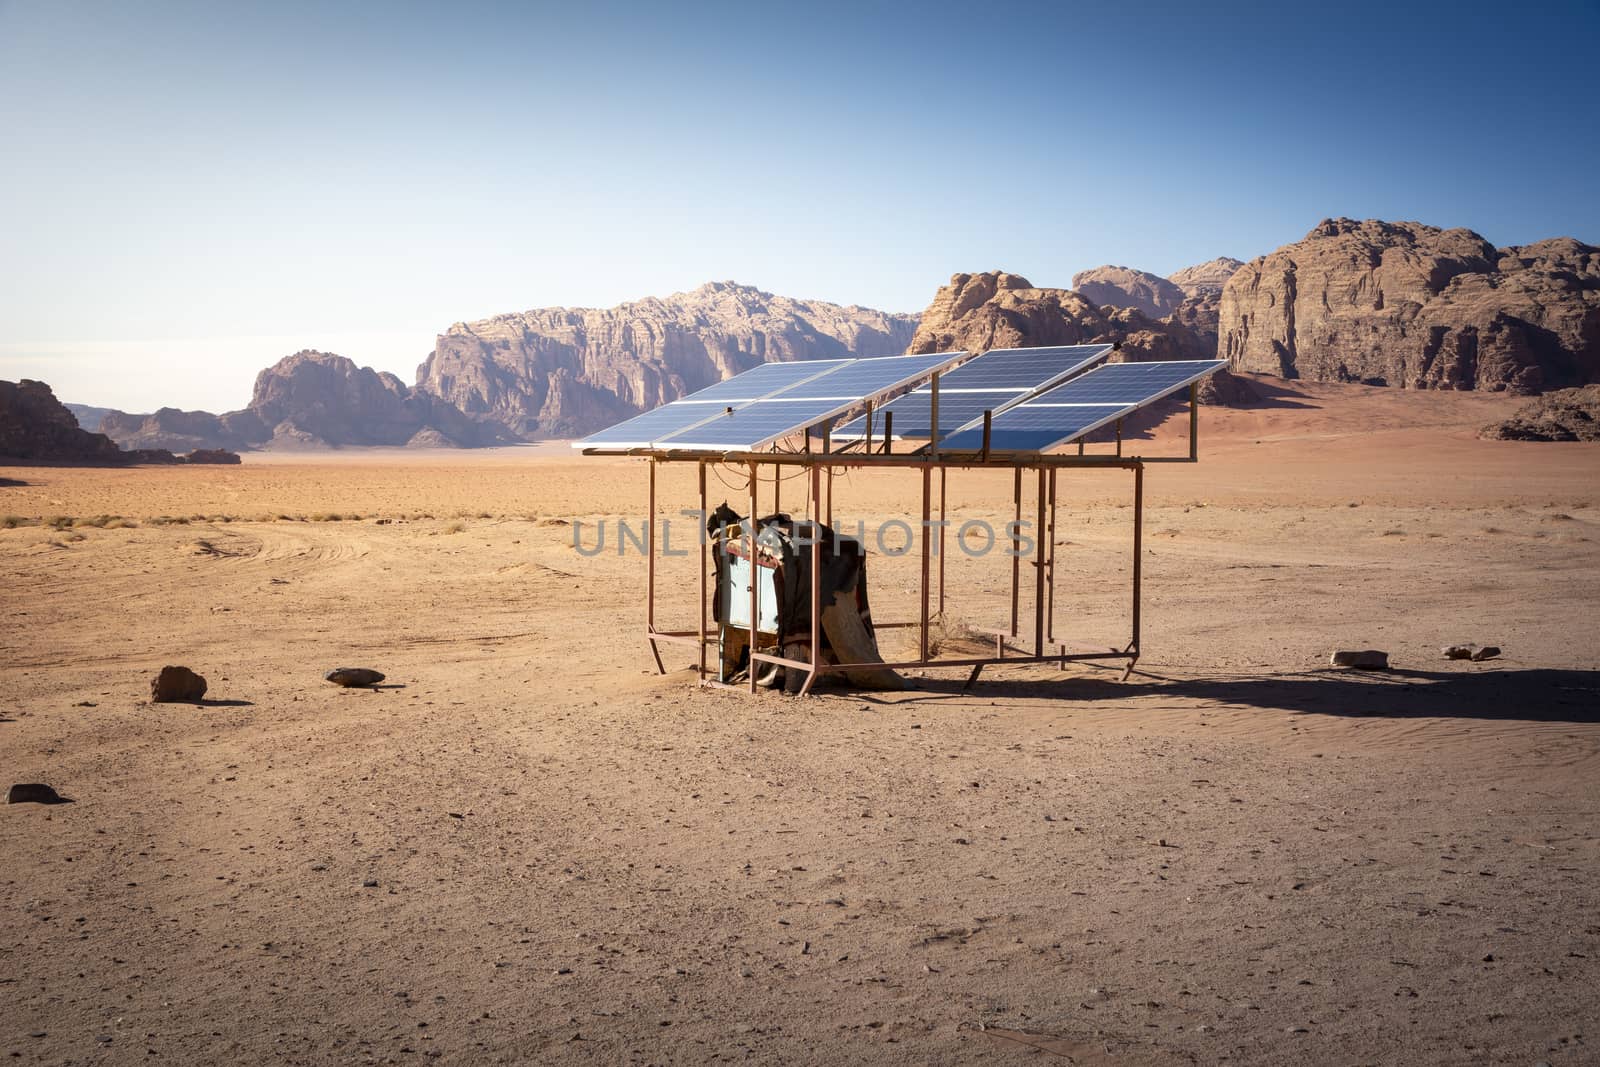 Off-grid and small scale solar installation in the desert